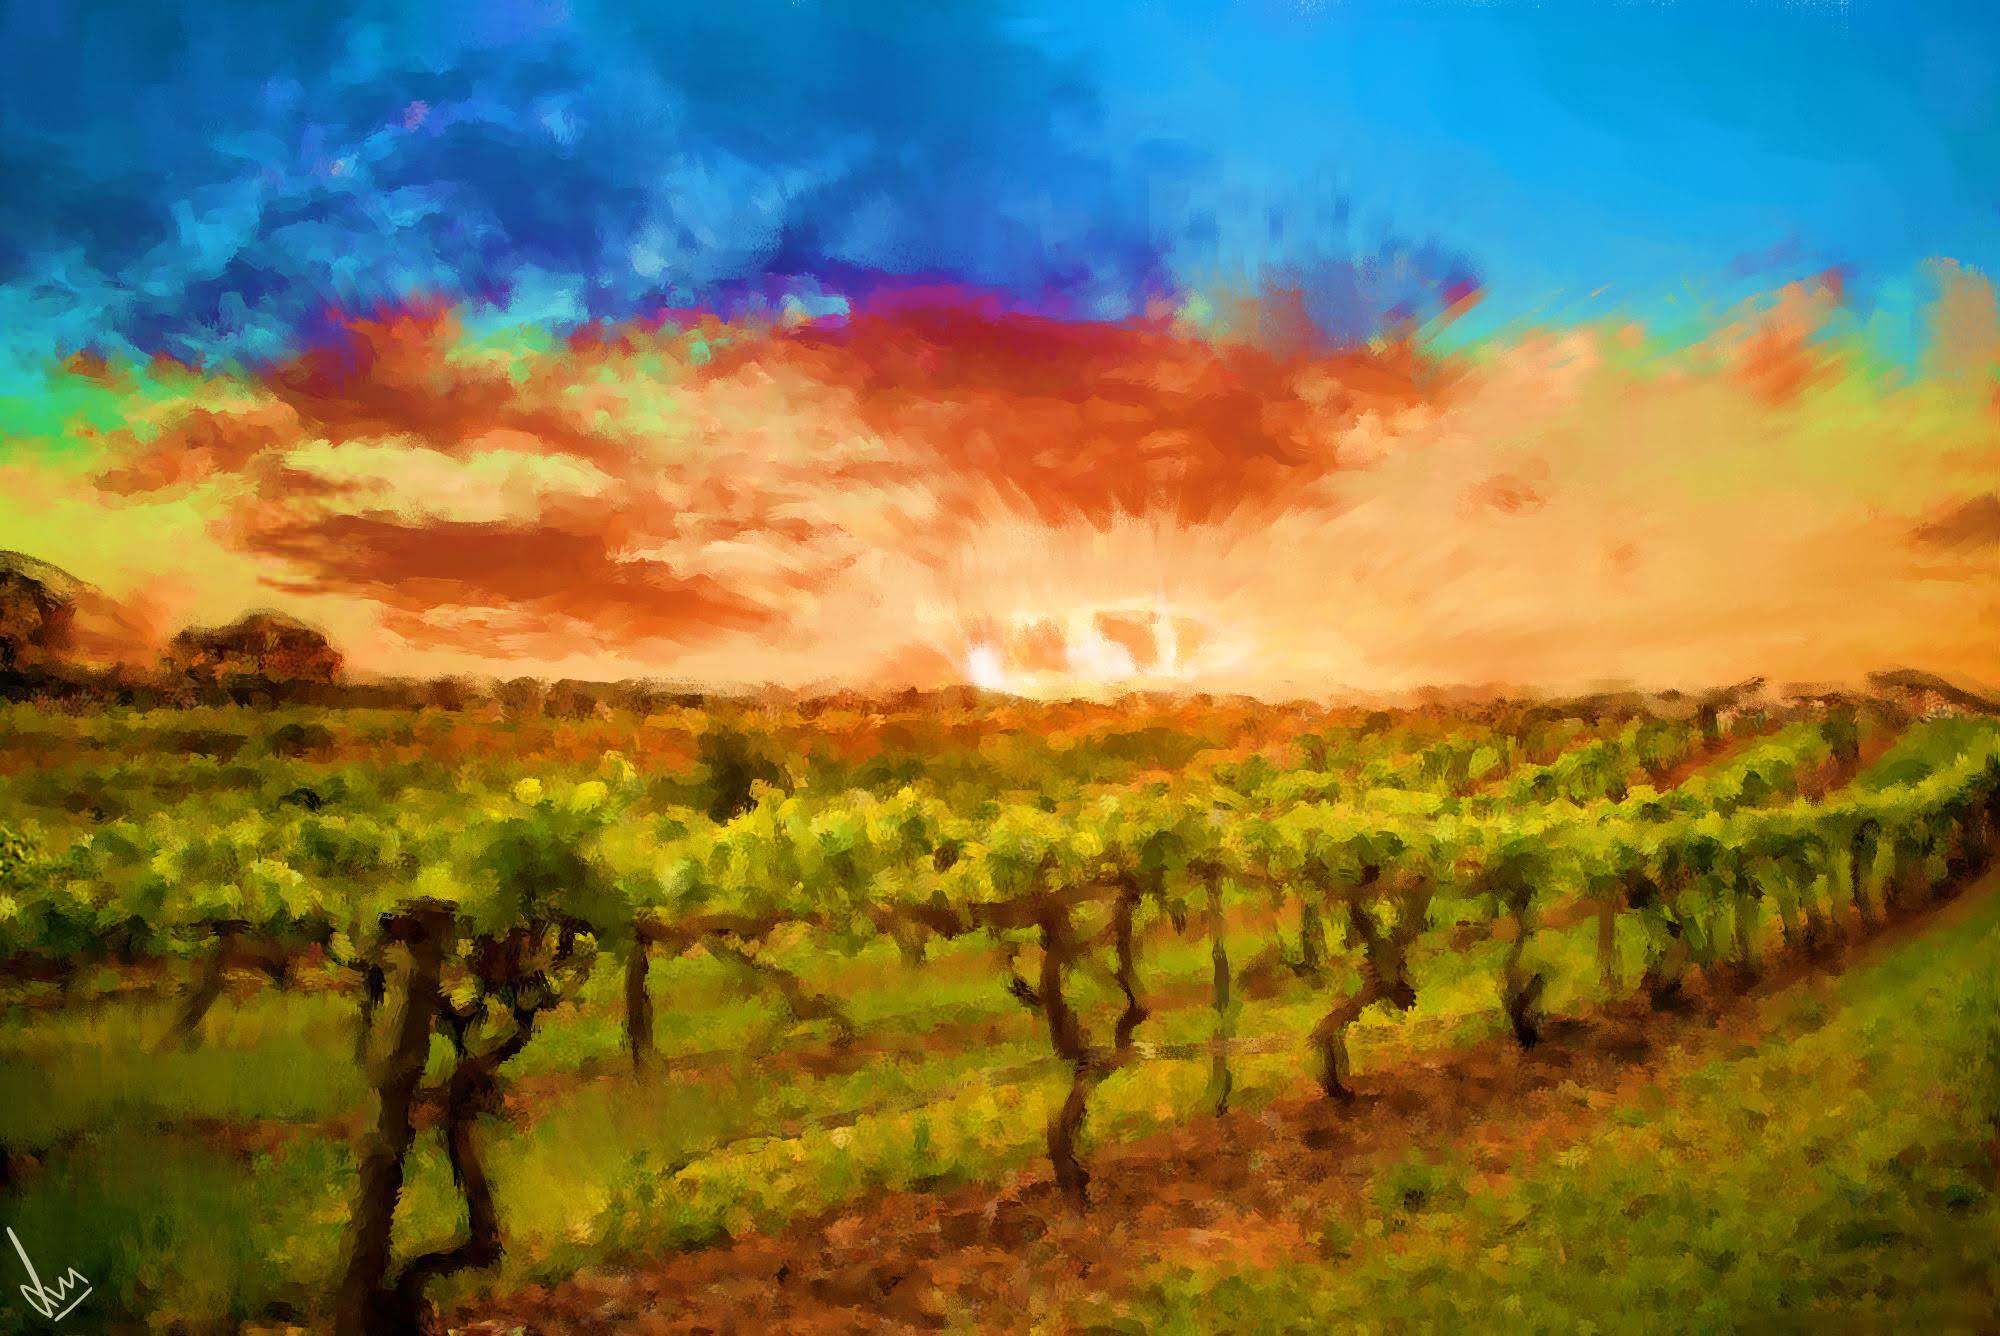 Vineyards of Barossa Valley, South Australia - Digital Painting by Shaalyn Monteiro